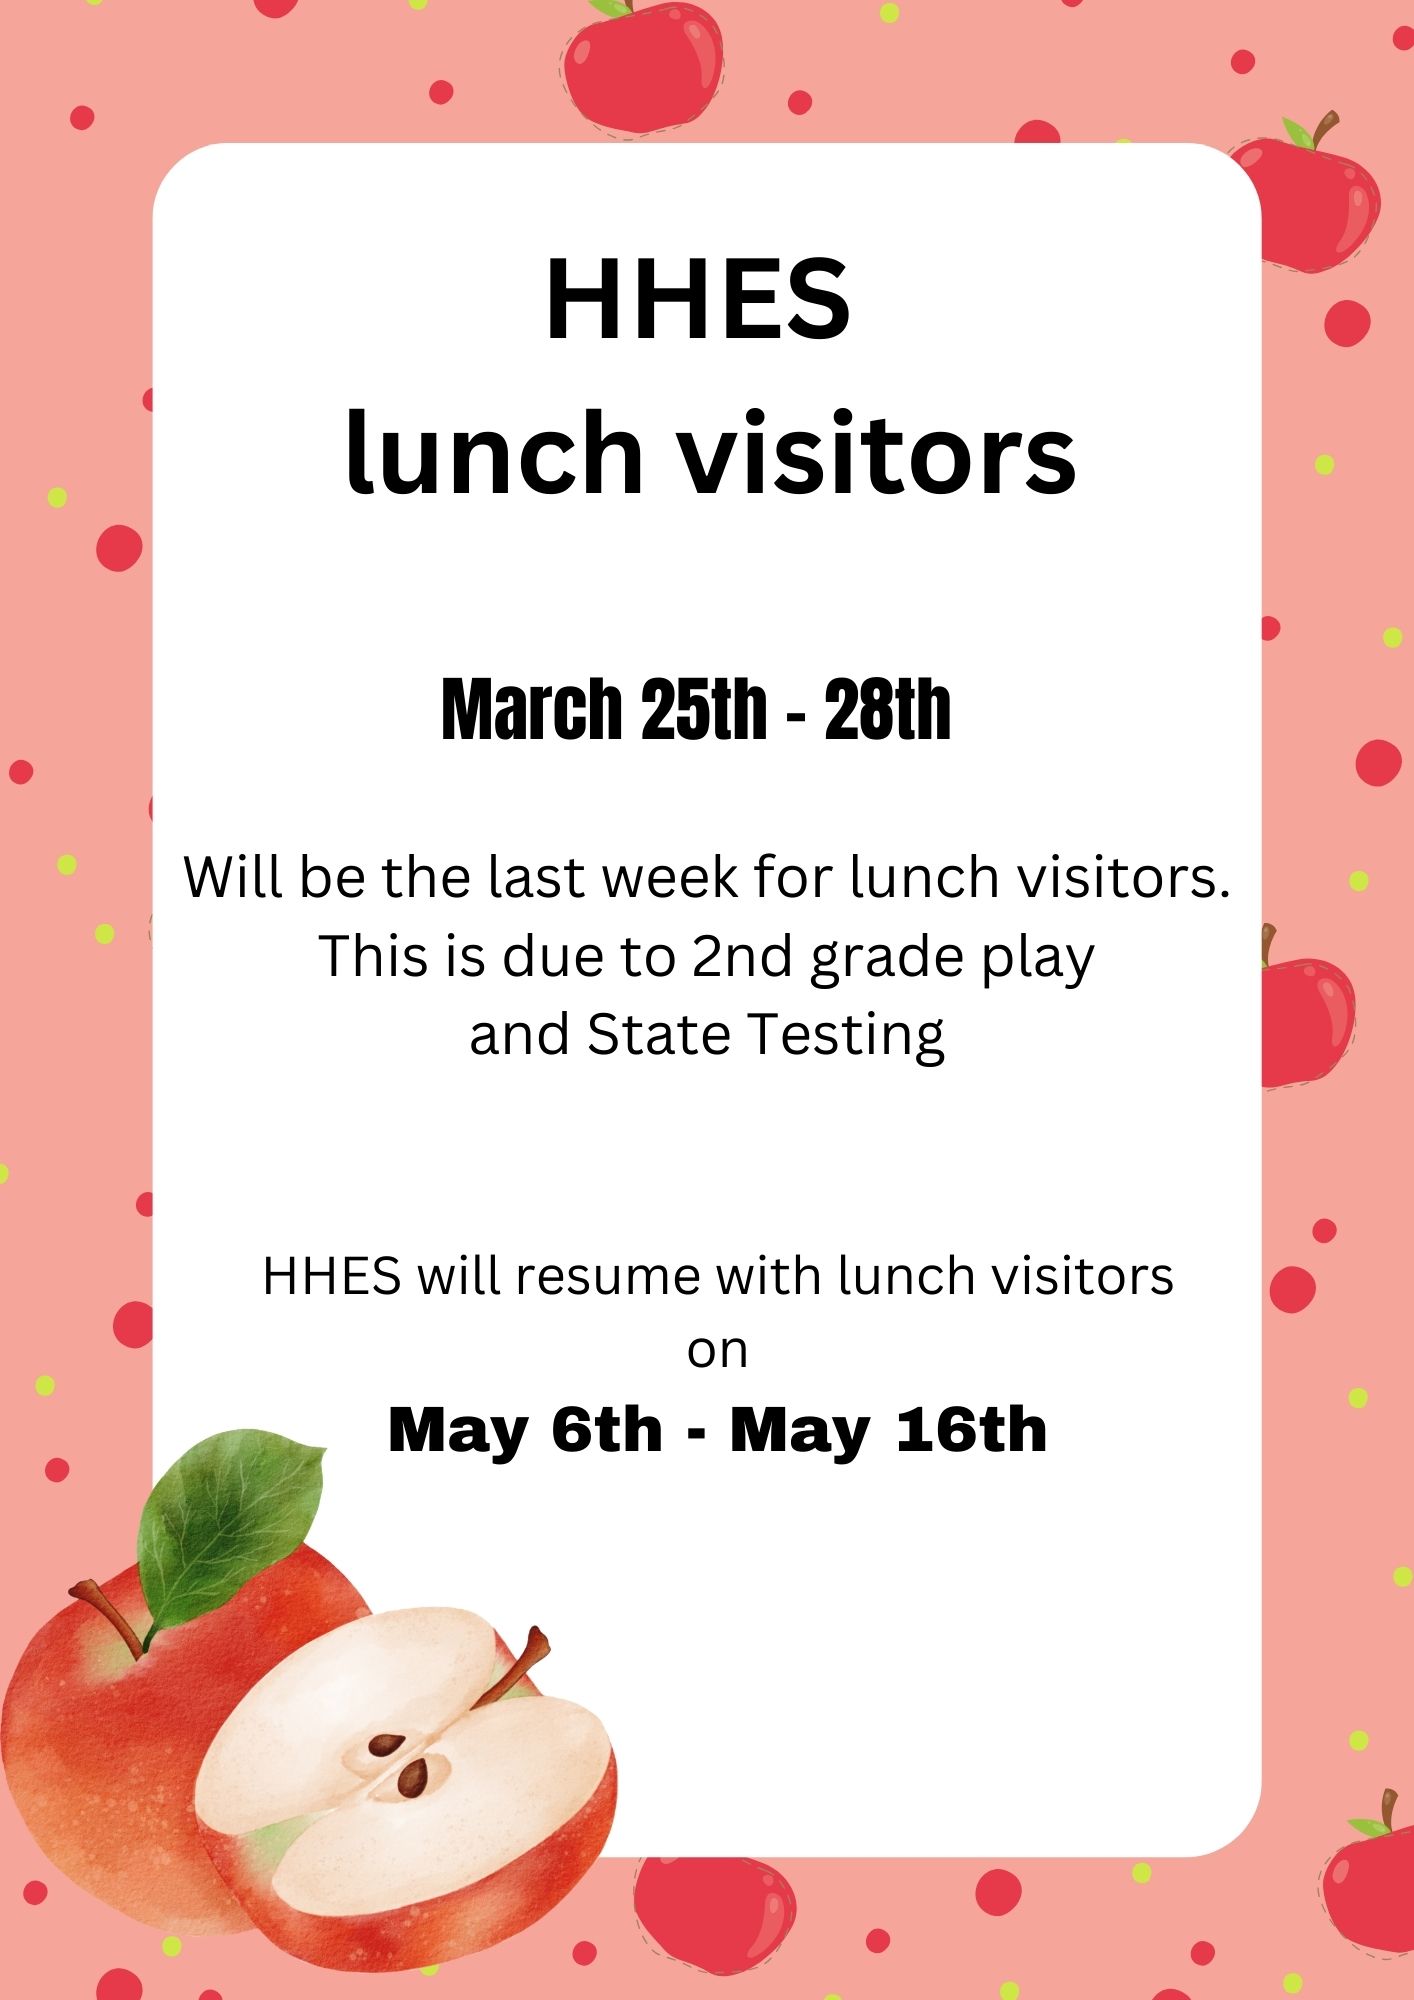 HHES  lunch visitors March 25th - 28th Will be the last week for lunch visitors. This is due to 2nd grade play  and State Testing HHES will resume with lunch visitors on  May 6th - May 16th 